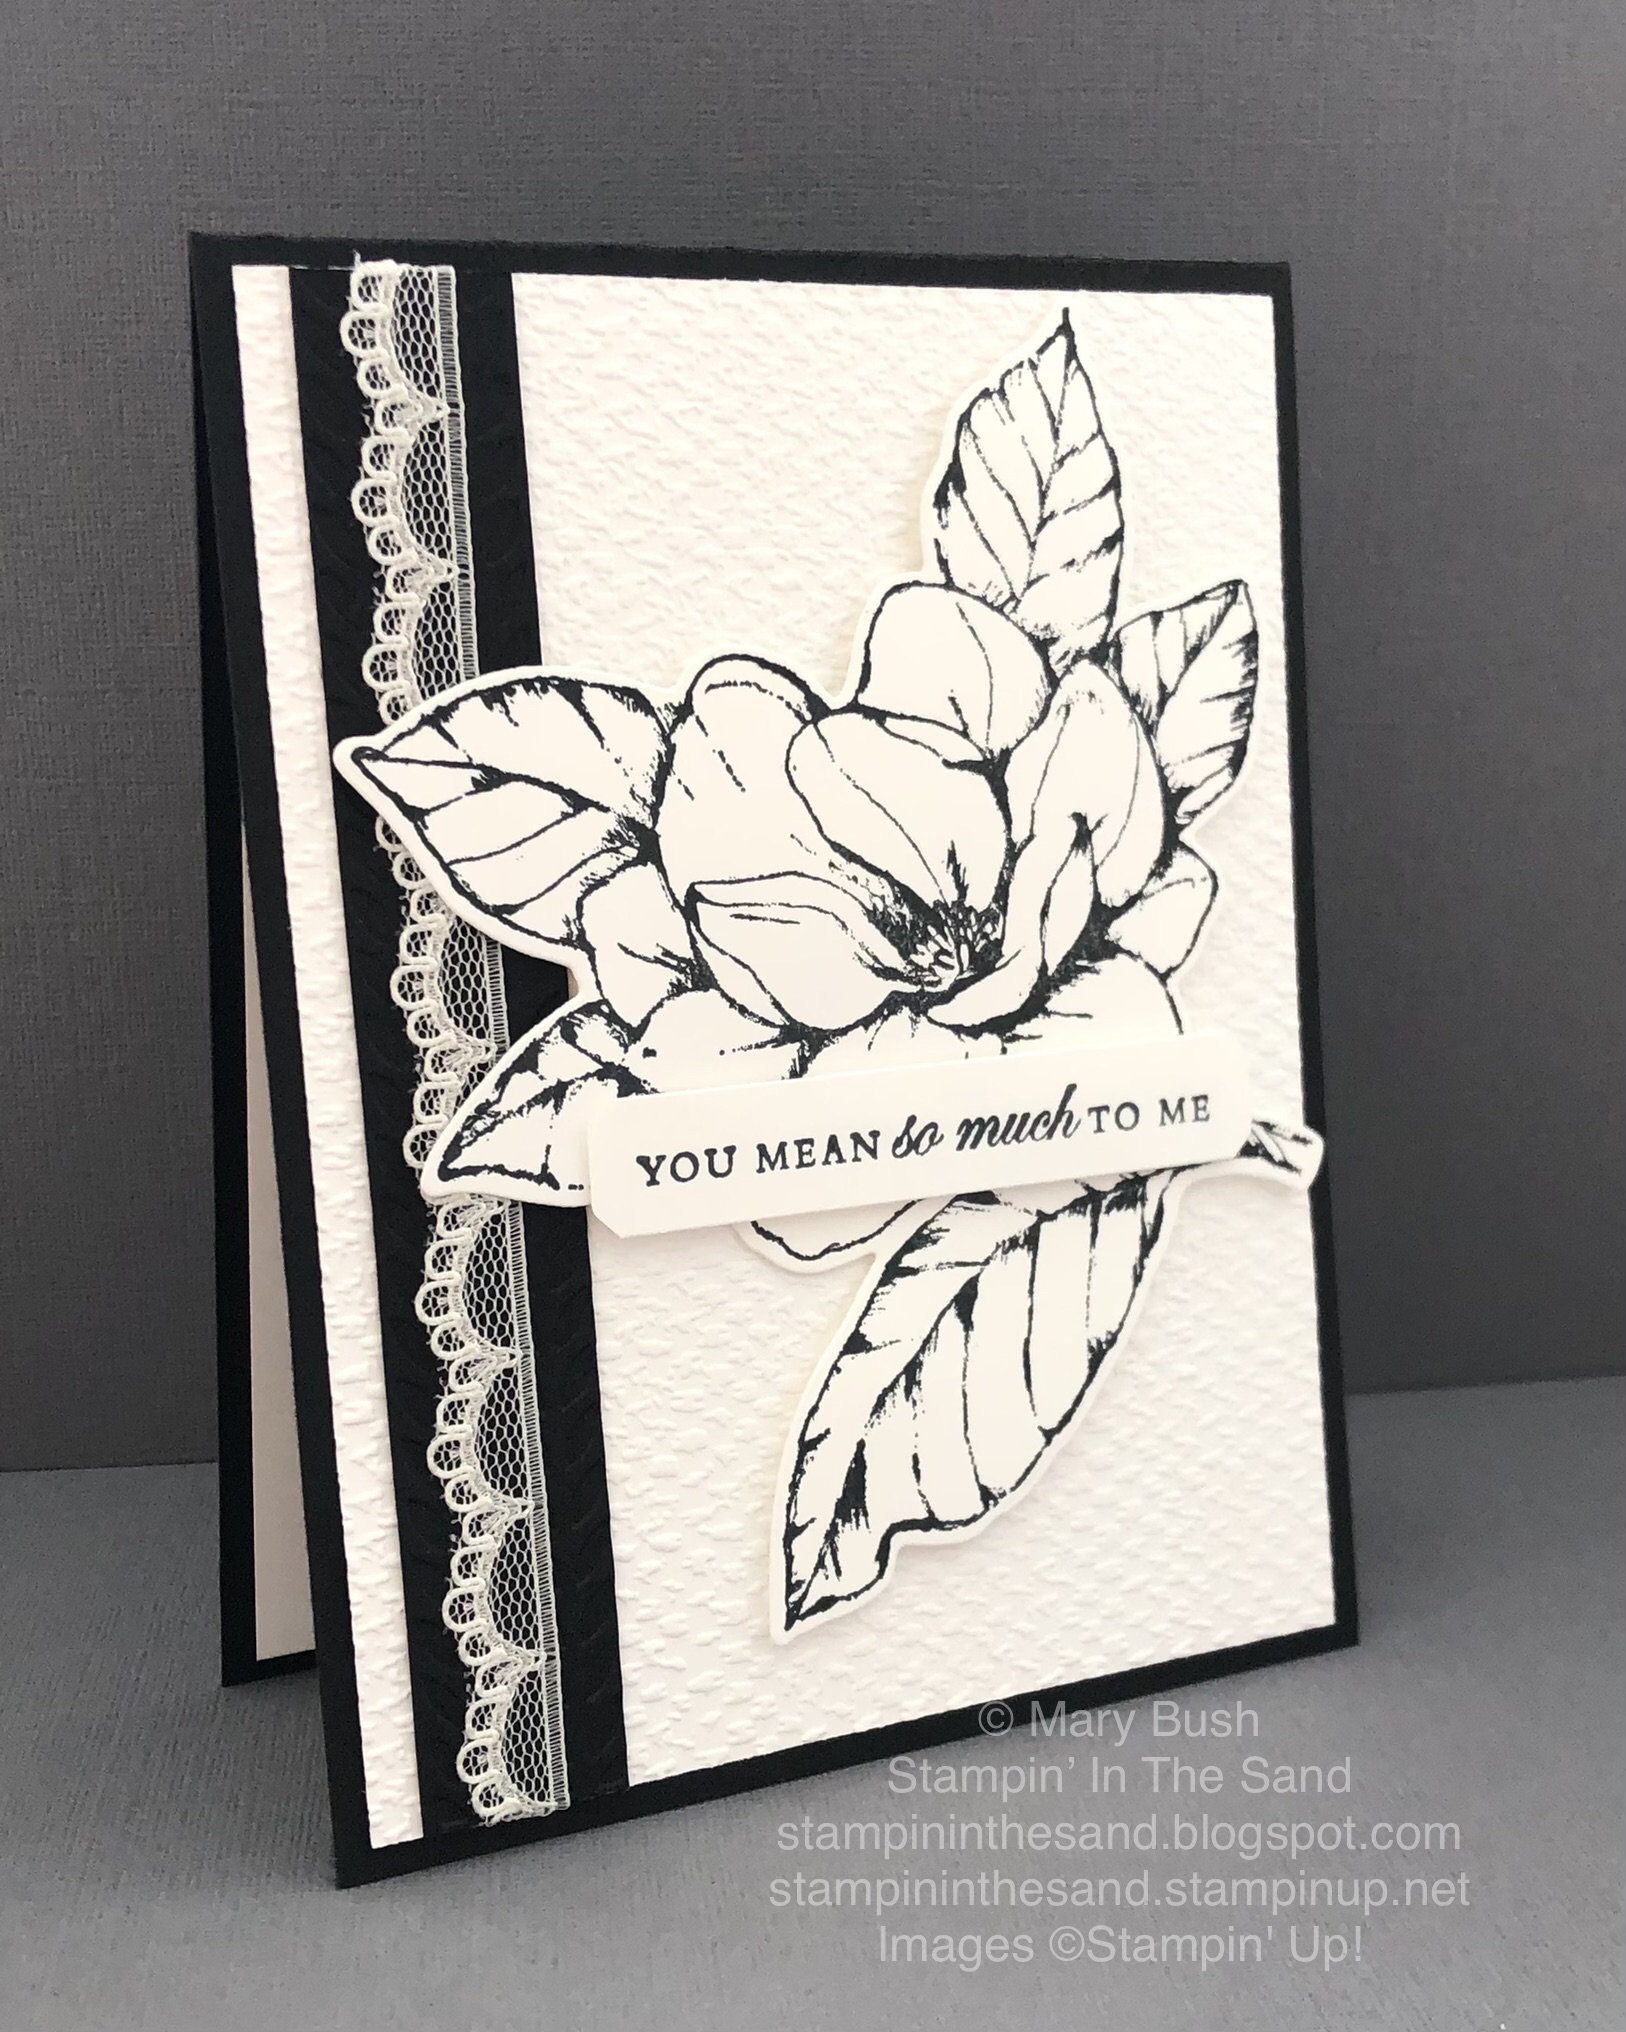 Stampin' in the Sand: A Good Morning Magnolia Classic Card